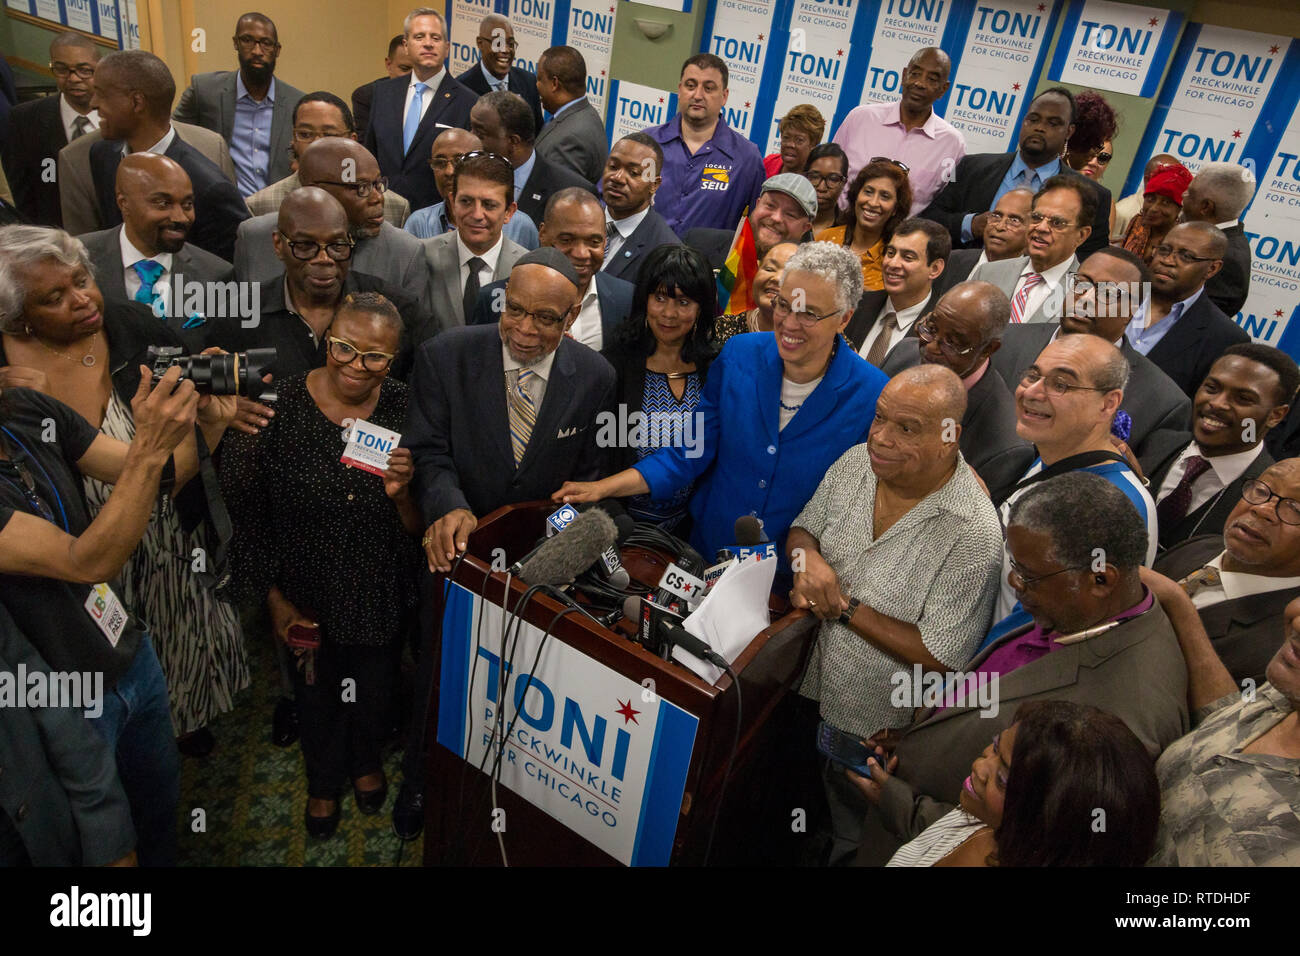 Cook County Board President Toni Preckwinkle announcing her run for mayor of Chicago on 9/20/18 in the same south side hotel conference room that Harold Washington announced his mayoral bid in 1982. In the February 26, 2019 election, Preckwinkle became one of the two top finishers in the 14 candidate race and will face Lori Lightfoot in the upcoming April 2nd runoff Stock Photo